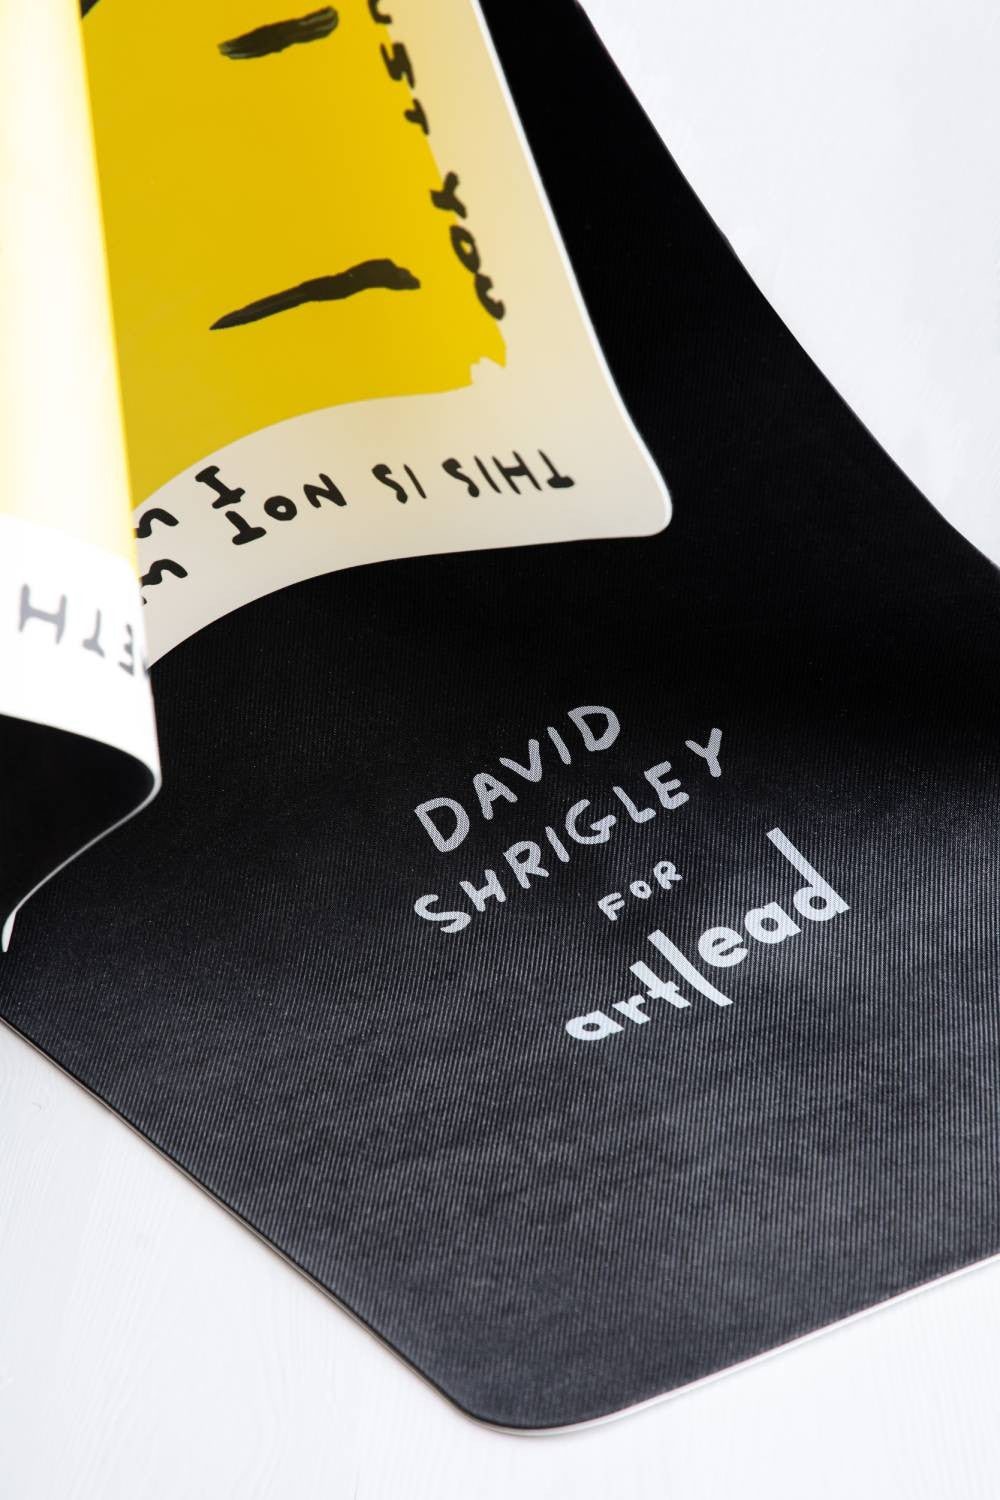 David Shrigley - This is not what I wanted..., 2021 Yoga Mat